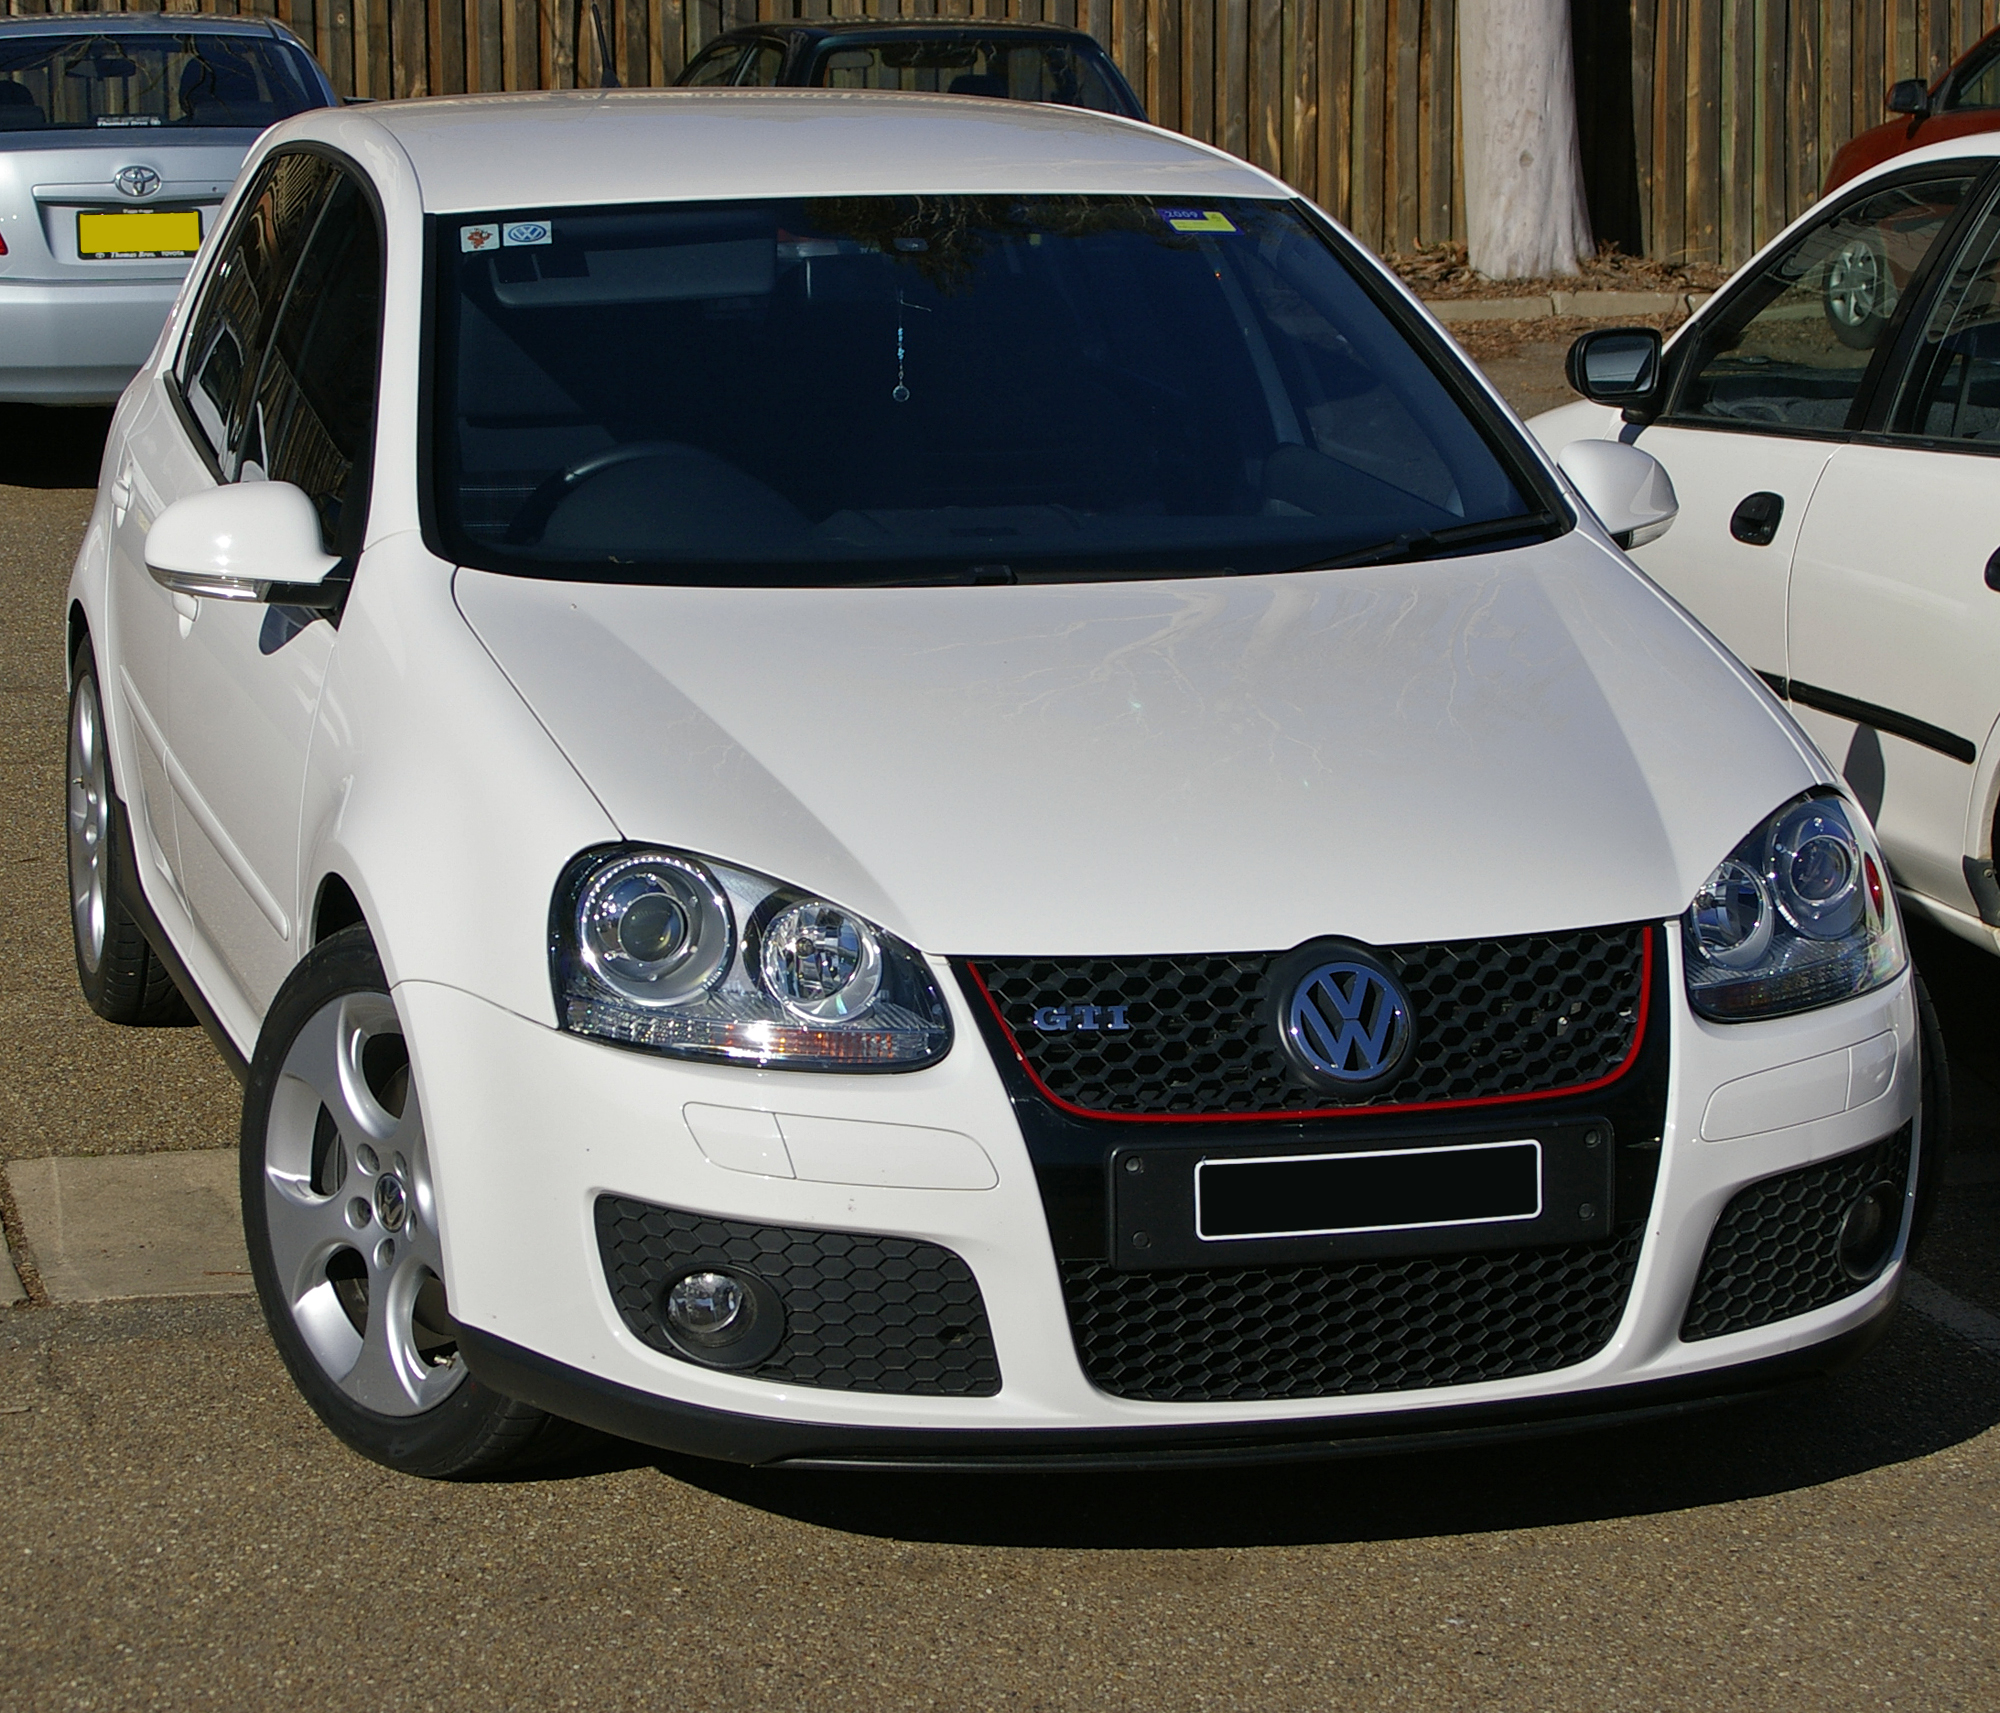 Volkswagen Golf GTI 2000 Review, Amazing Pictures and